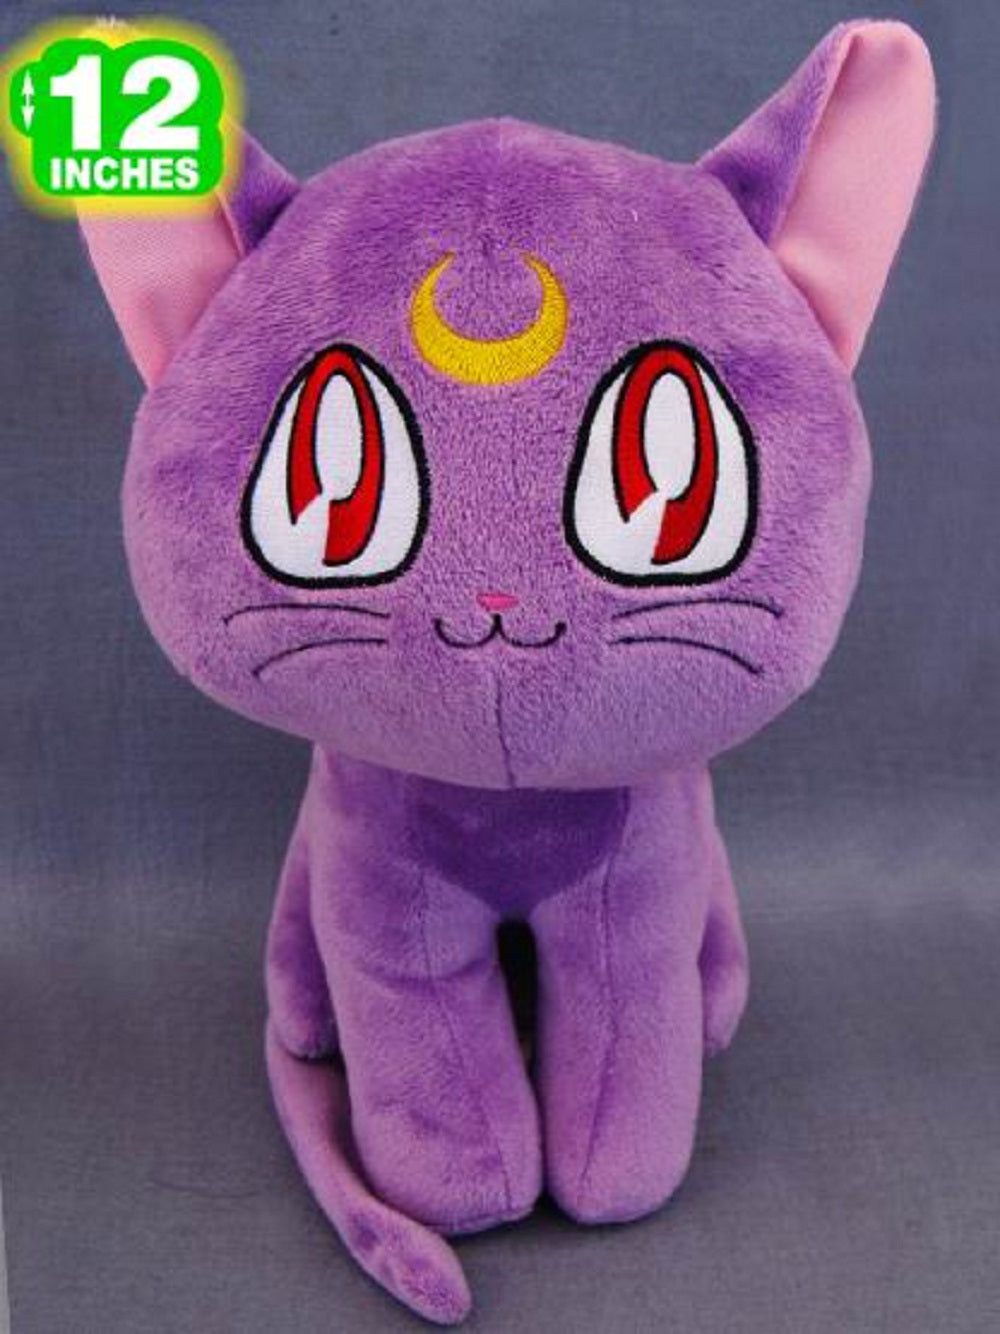 Sailor Moon Luna Plush Doll 12 Inches - Super Anime Store FREE SHIPPING FAST SHIPPING USA